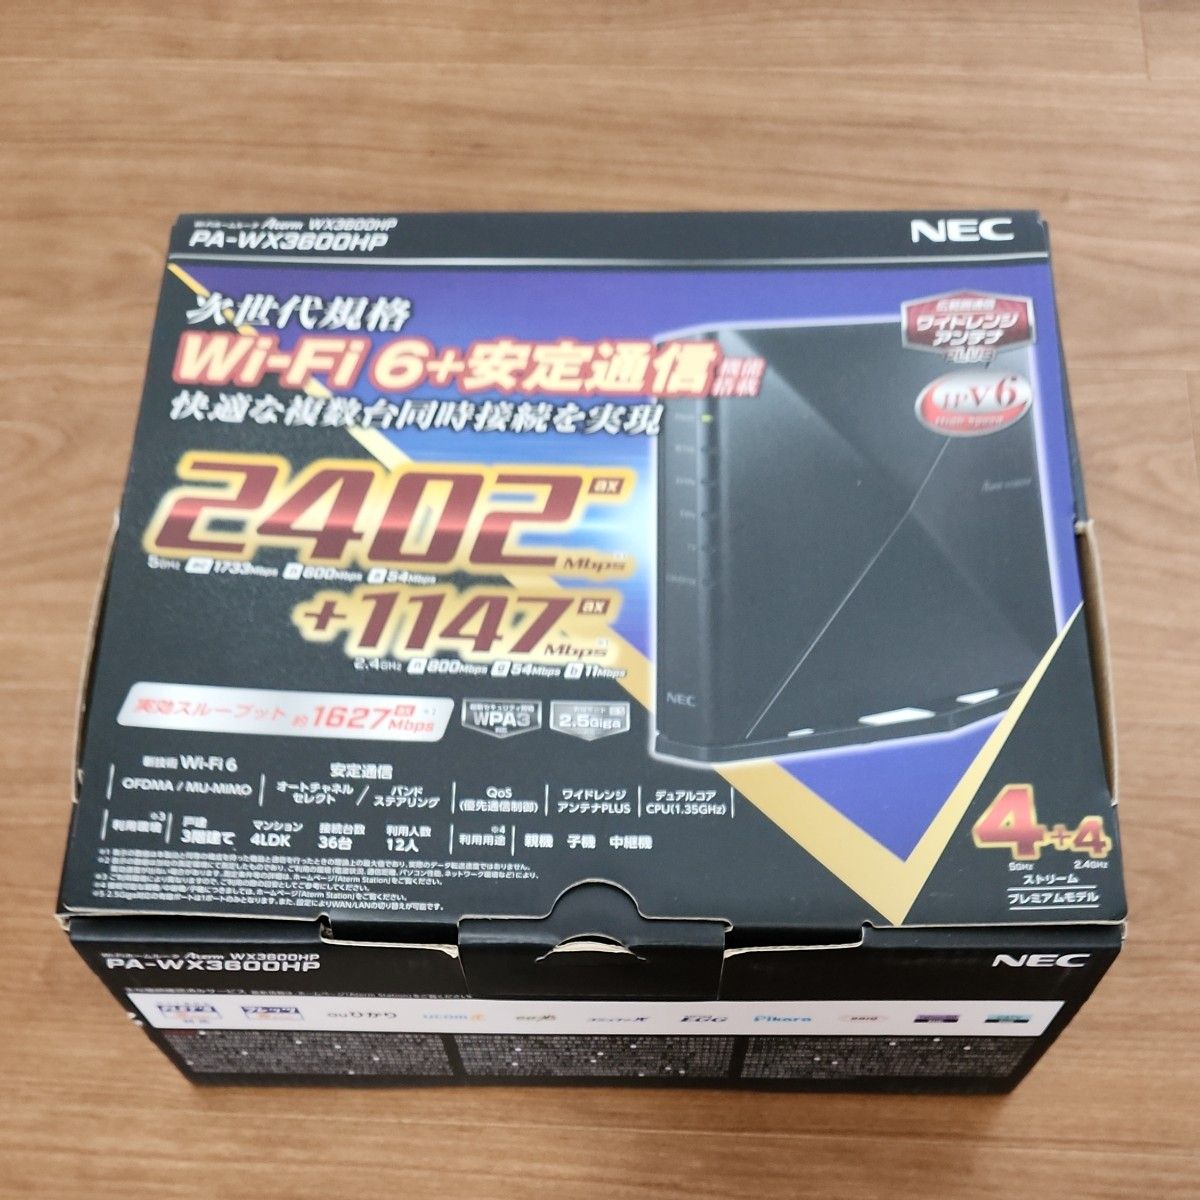 Aterm WX3600HP PA-WX3600HP　 Wi-Fiルーター　 NEC